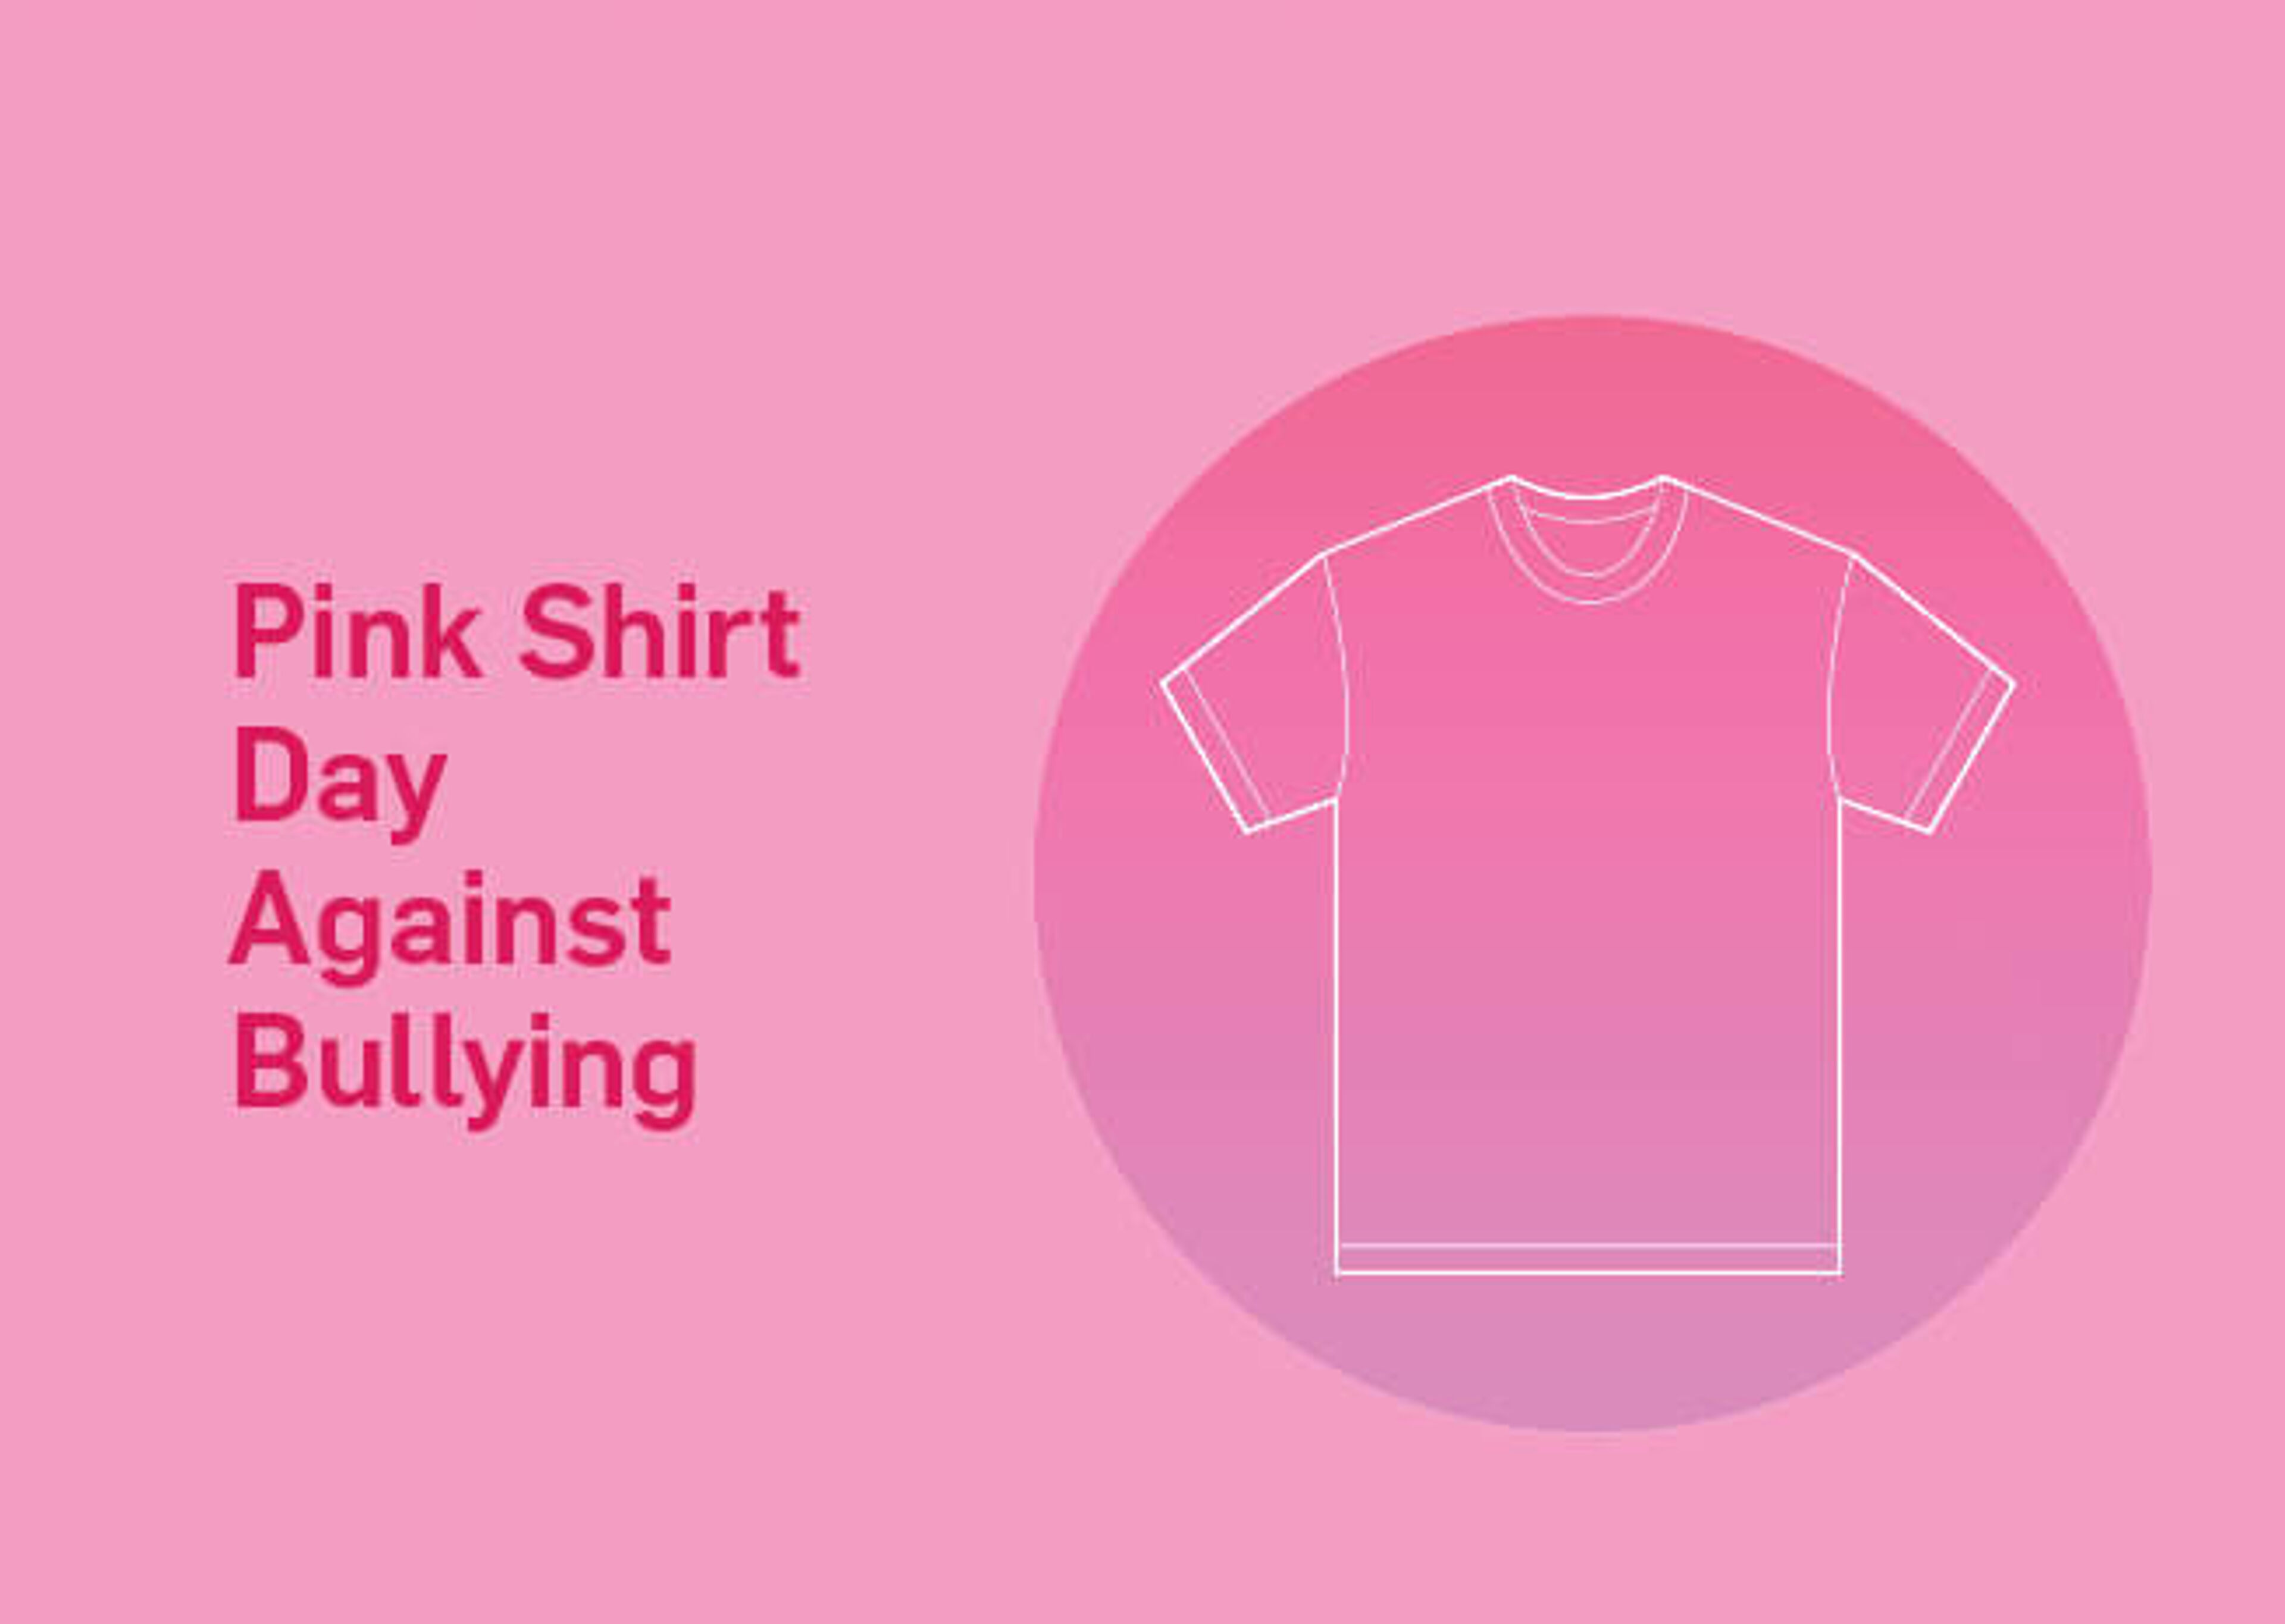 A graphic poster promoting Pink Shirt Day, featuring a simplistic pink t-shirt design to symbolize solidarity against bullying.

